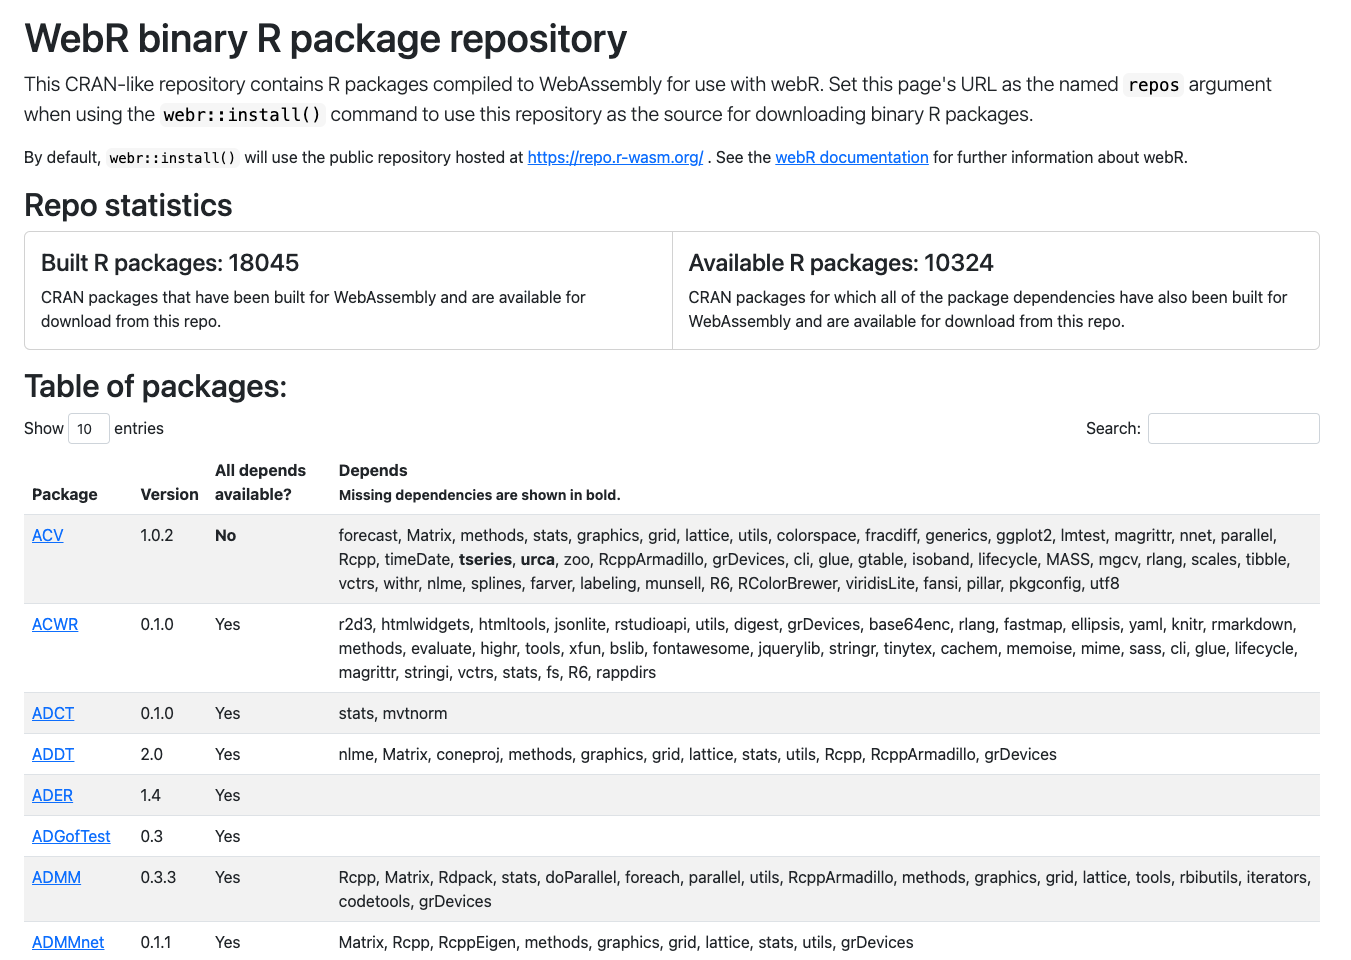 A screenshot of the webR binary R package repository index page. A table of available R packages is shown, along with their prerequisites